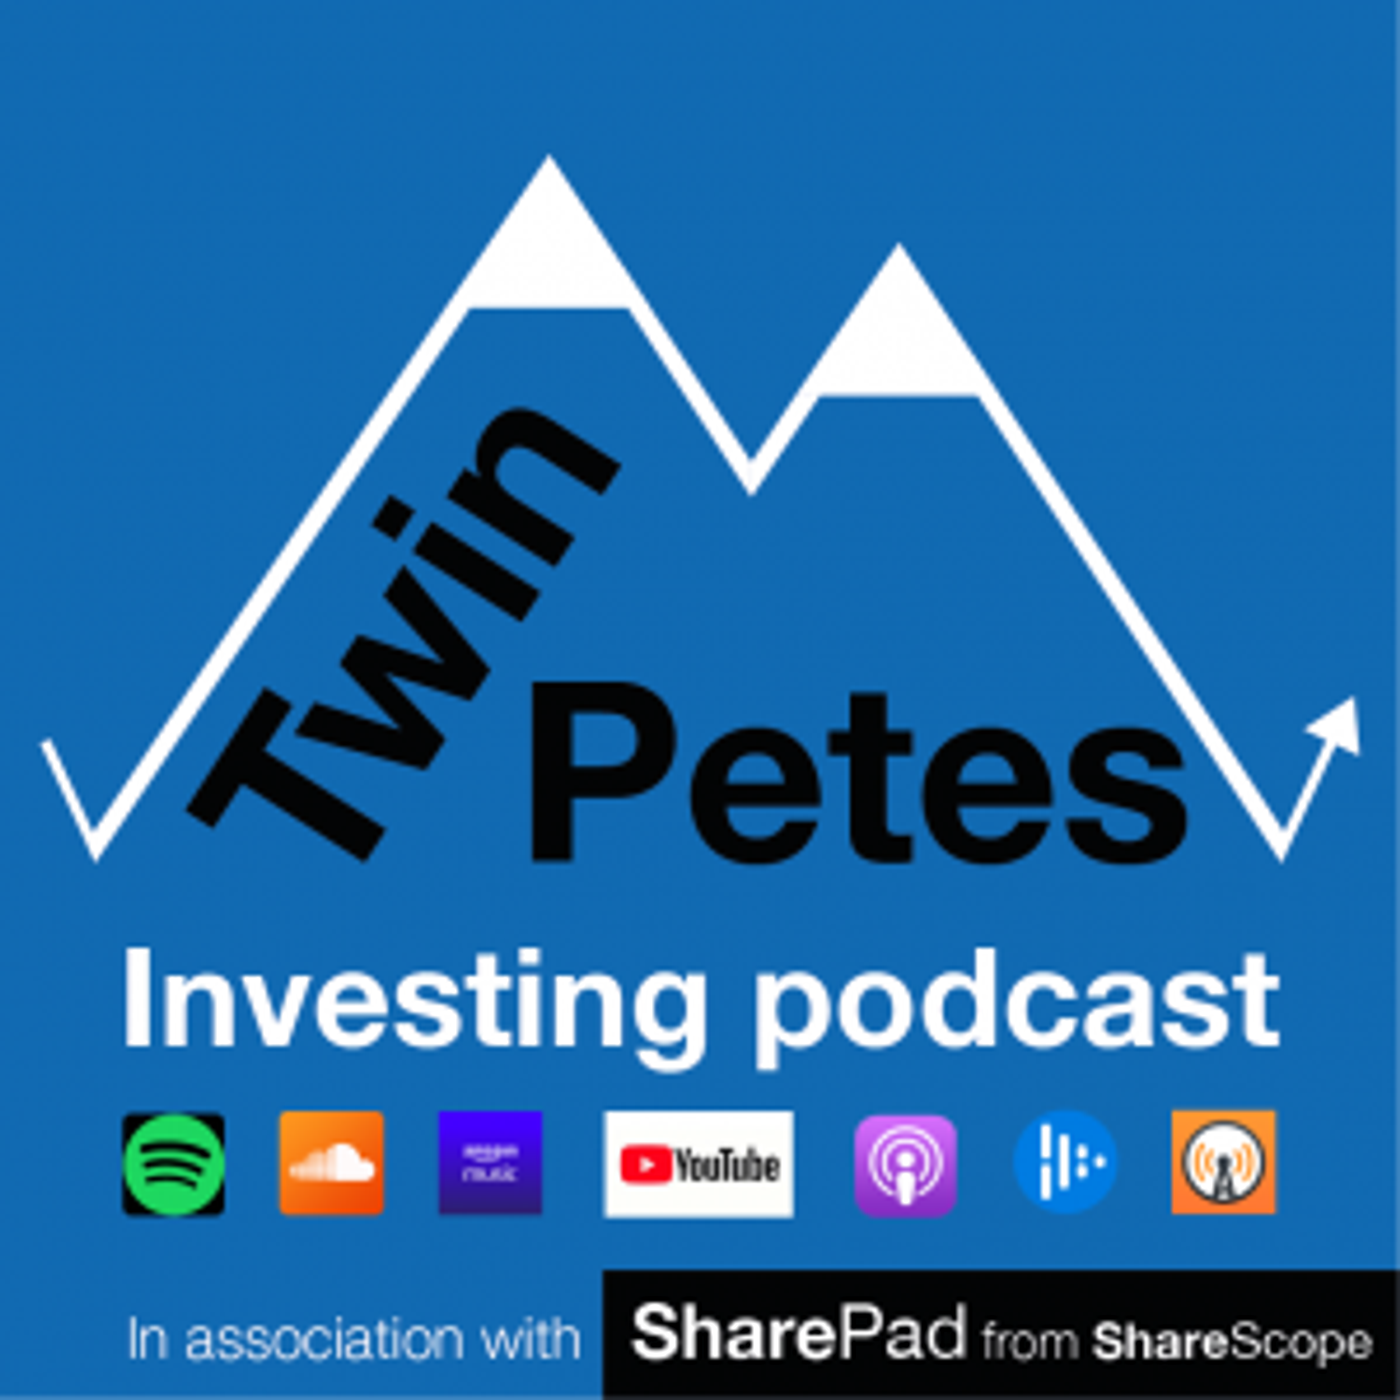 174: TWIN PETES INVESTING Podcast no.121: With Phil Oakley, Nvidia, Whitbread, 4Imprint, Bloomsbury Publishing, GSK, Puma, Newmark Security, Palo Alto Networks, Strong markets India Japan Turkey, Tech